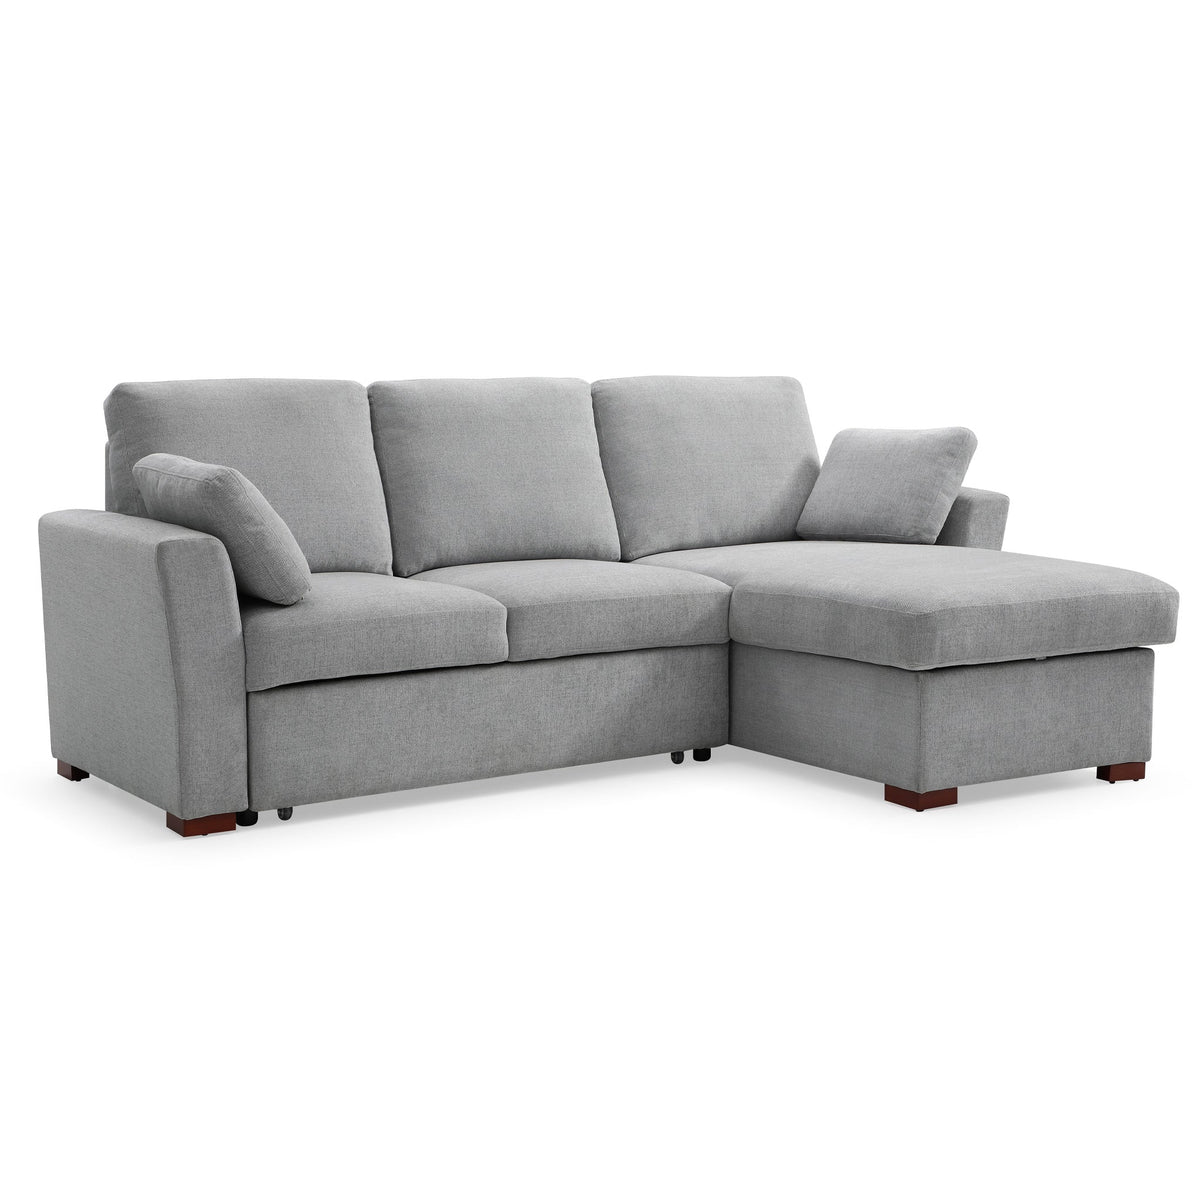 Levan Grey 3 Seater Corner Chaise Sofabed with Storage from Roseland